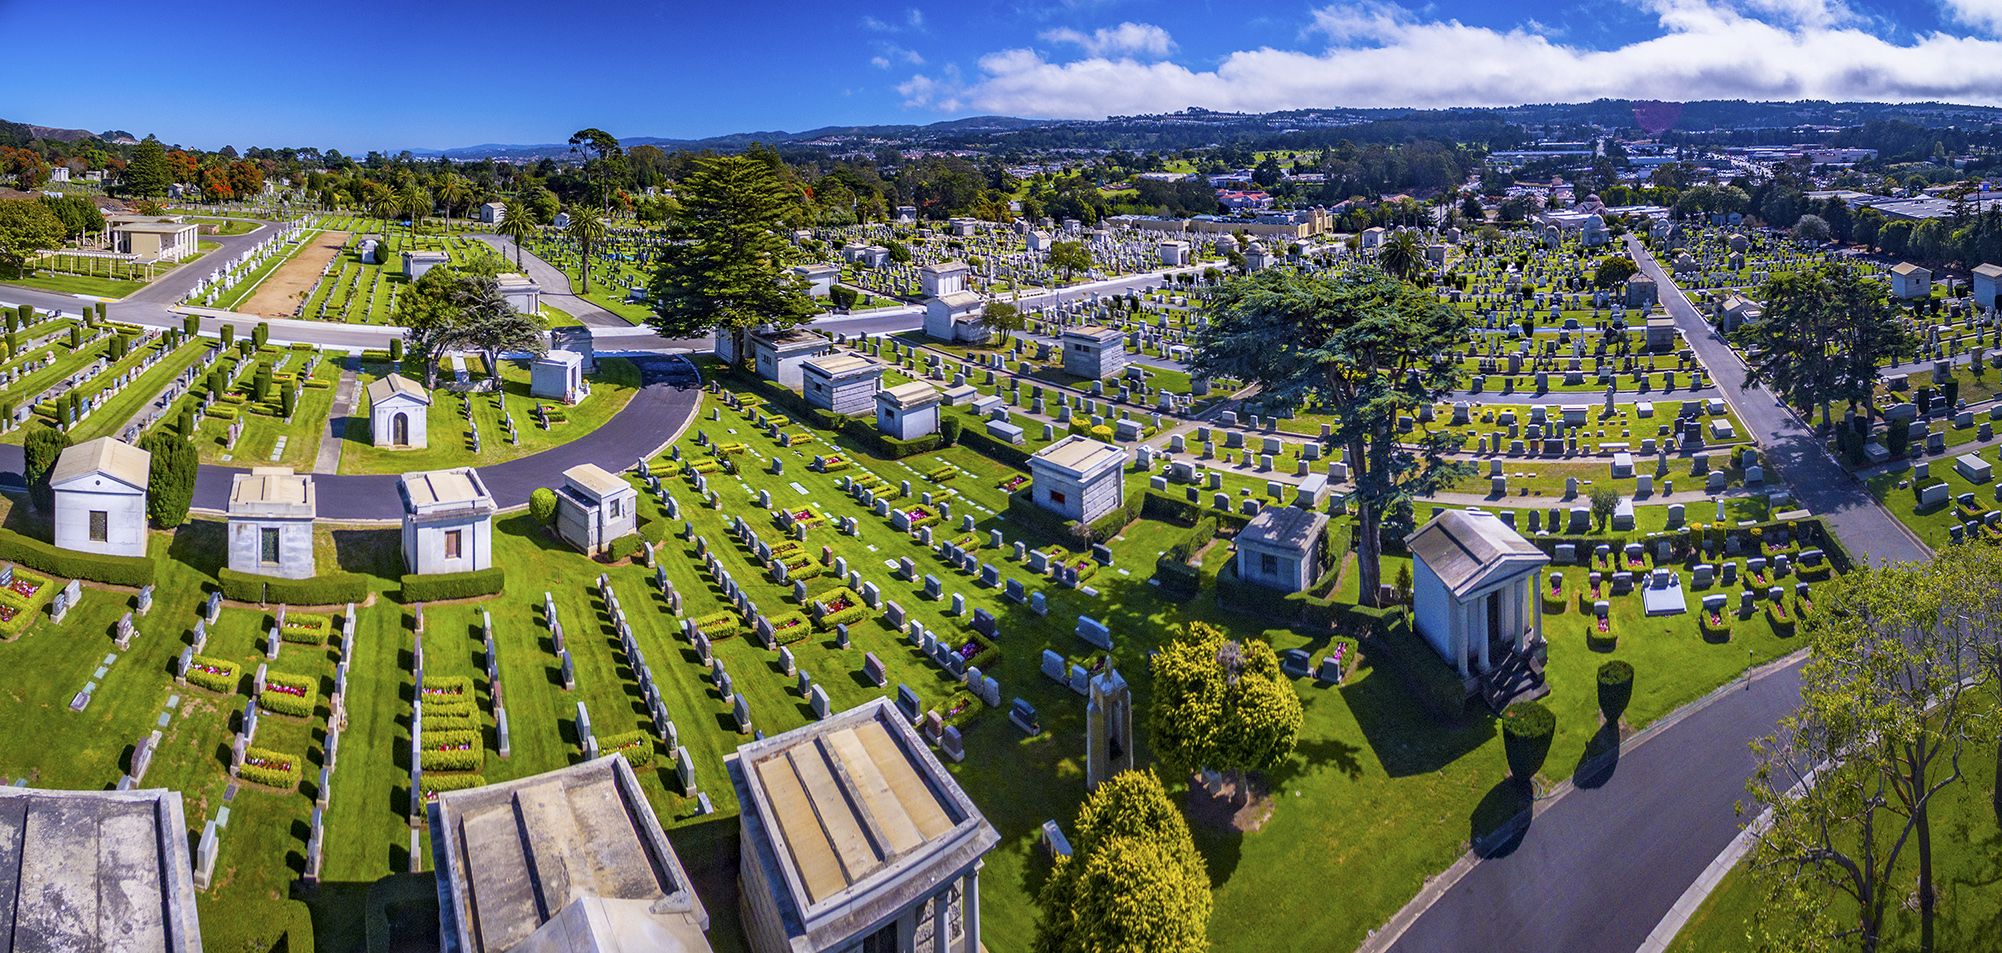 Drone image of a cemetery